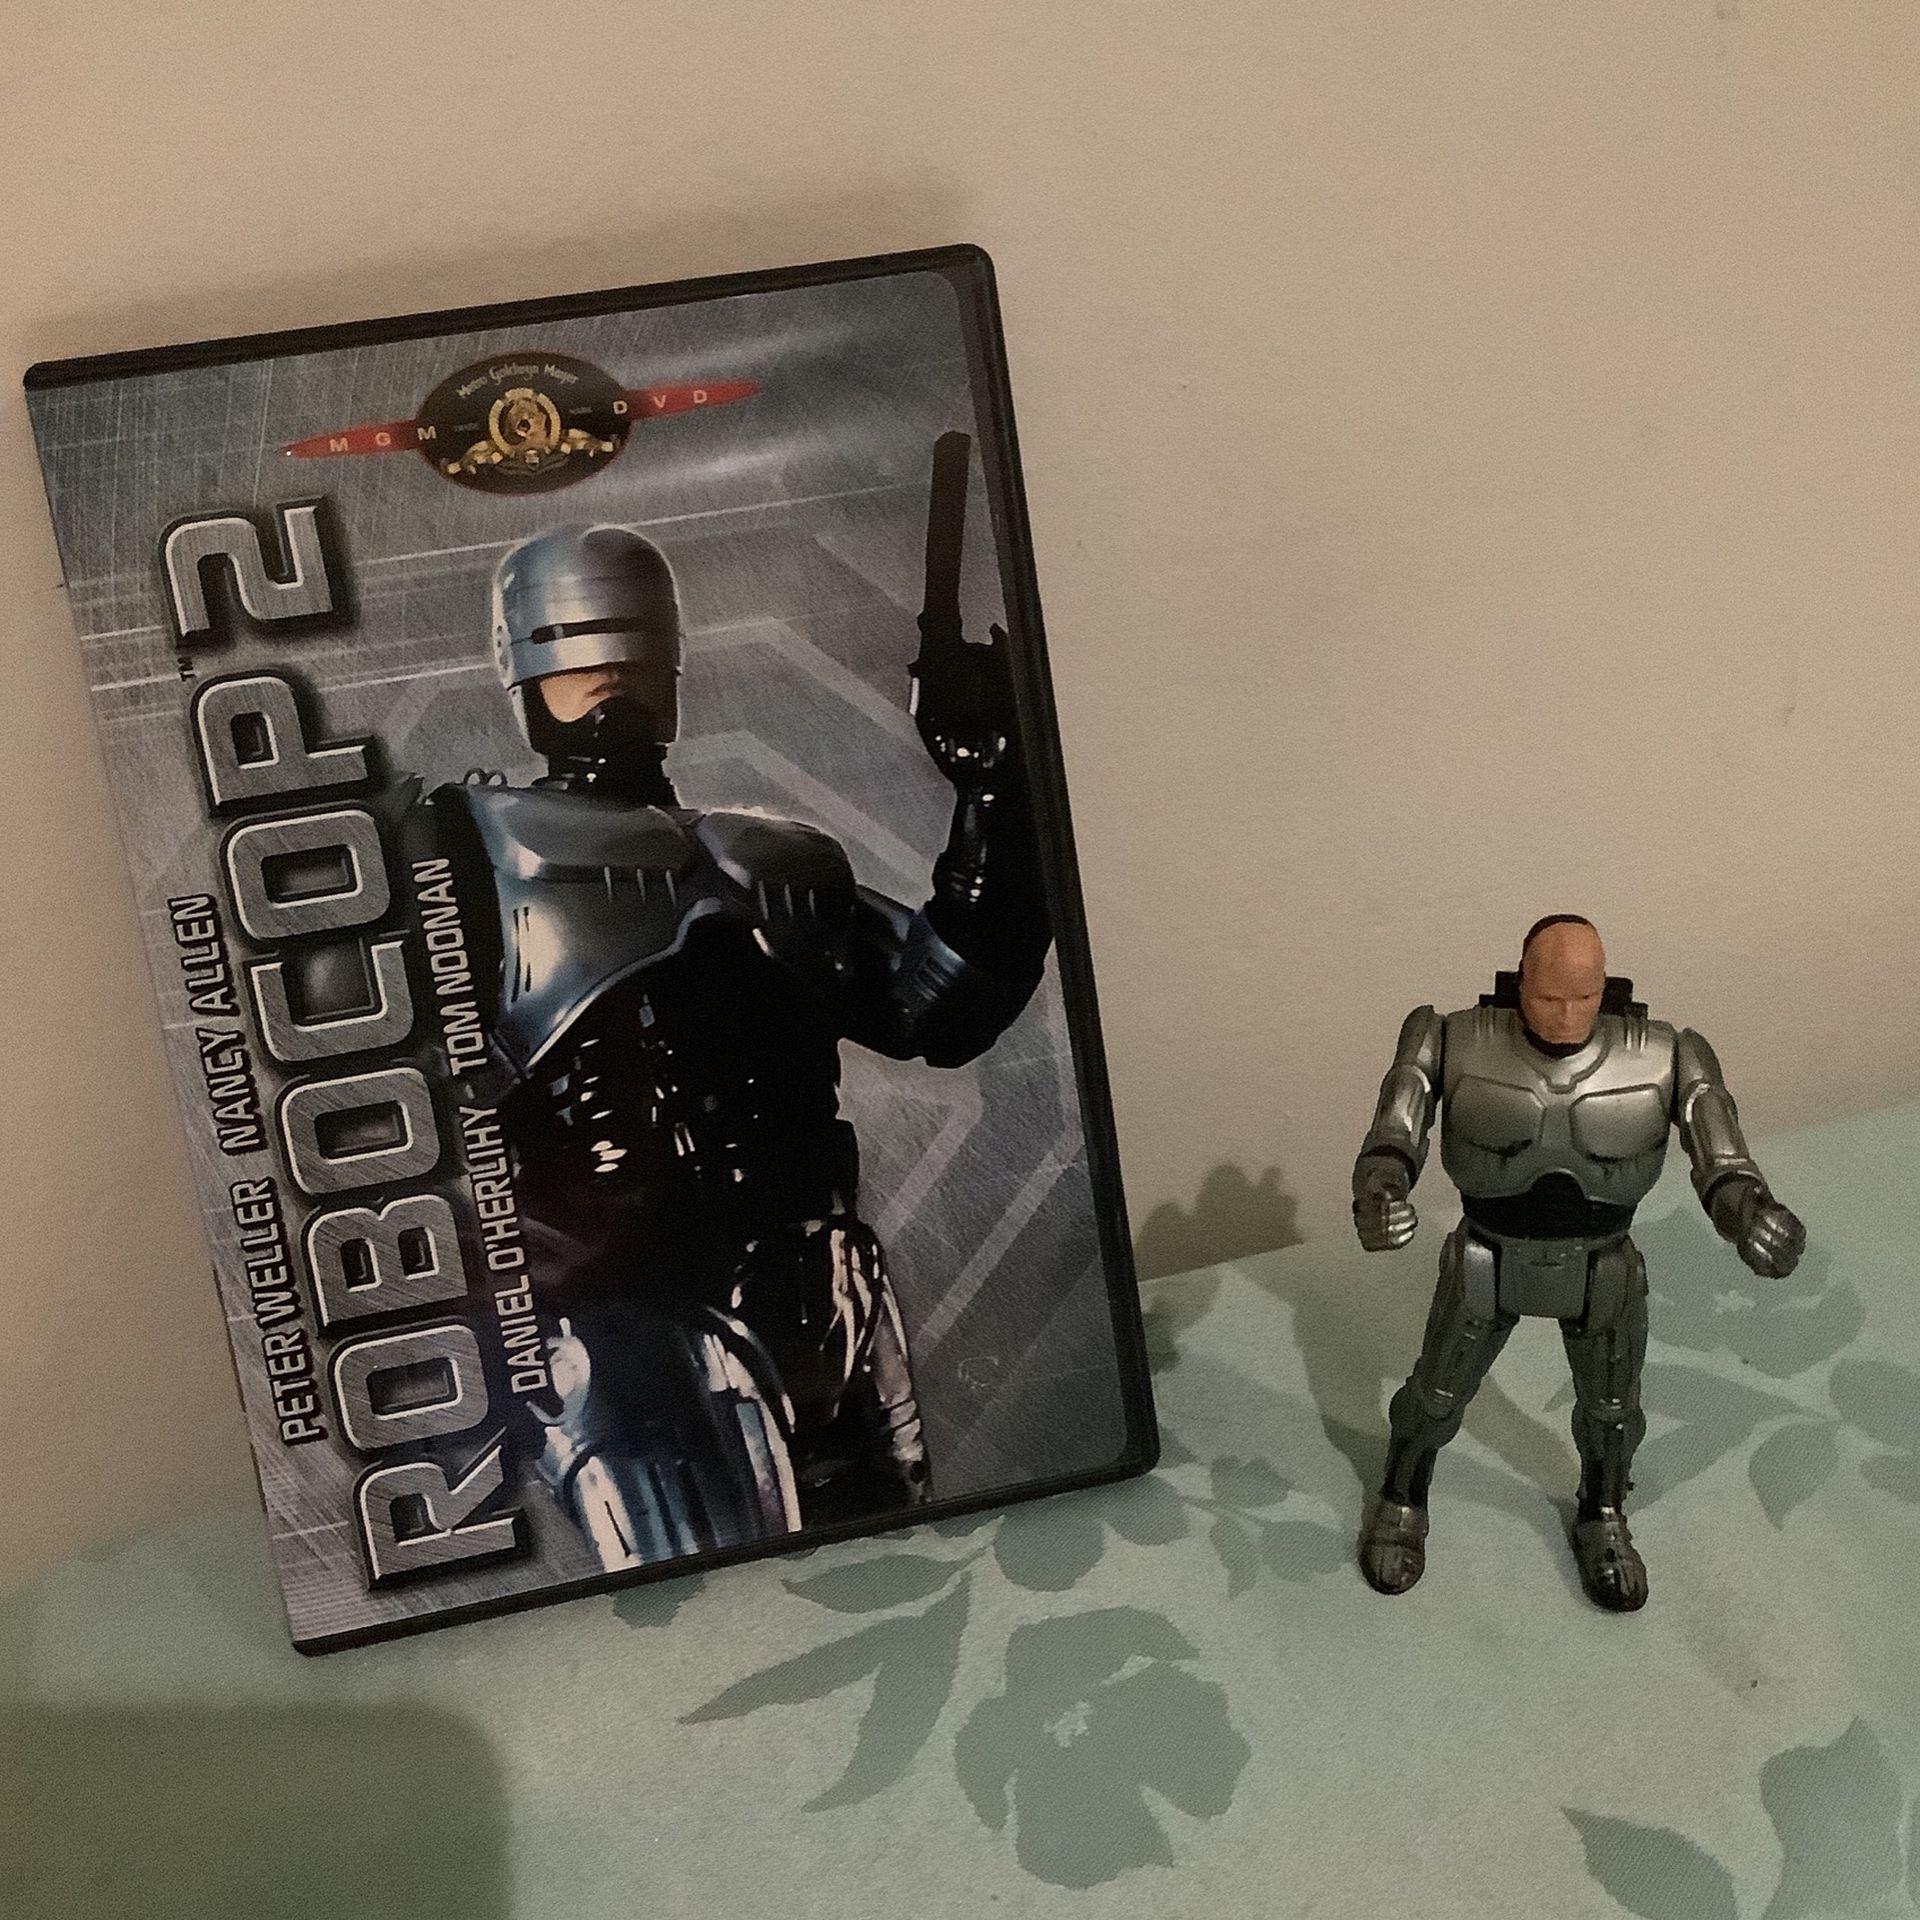 Vtg 1988 Collectible Robocop Officer Murphy Action Figure by Orion #0824. Excellent used